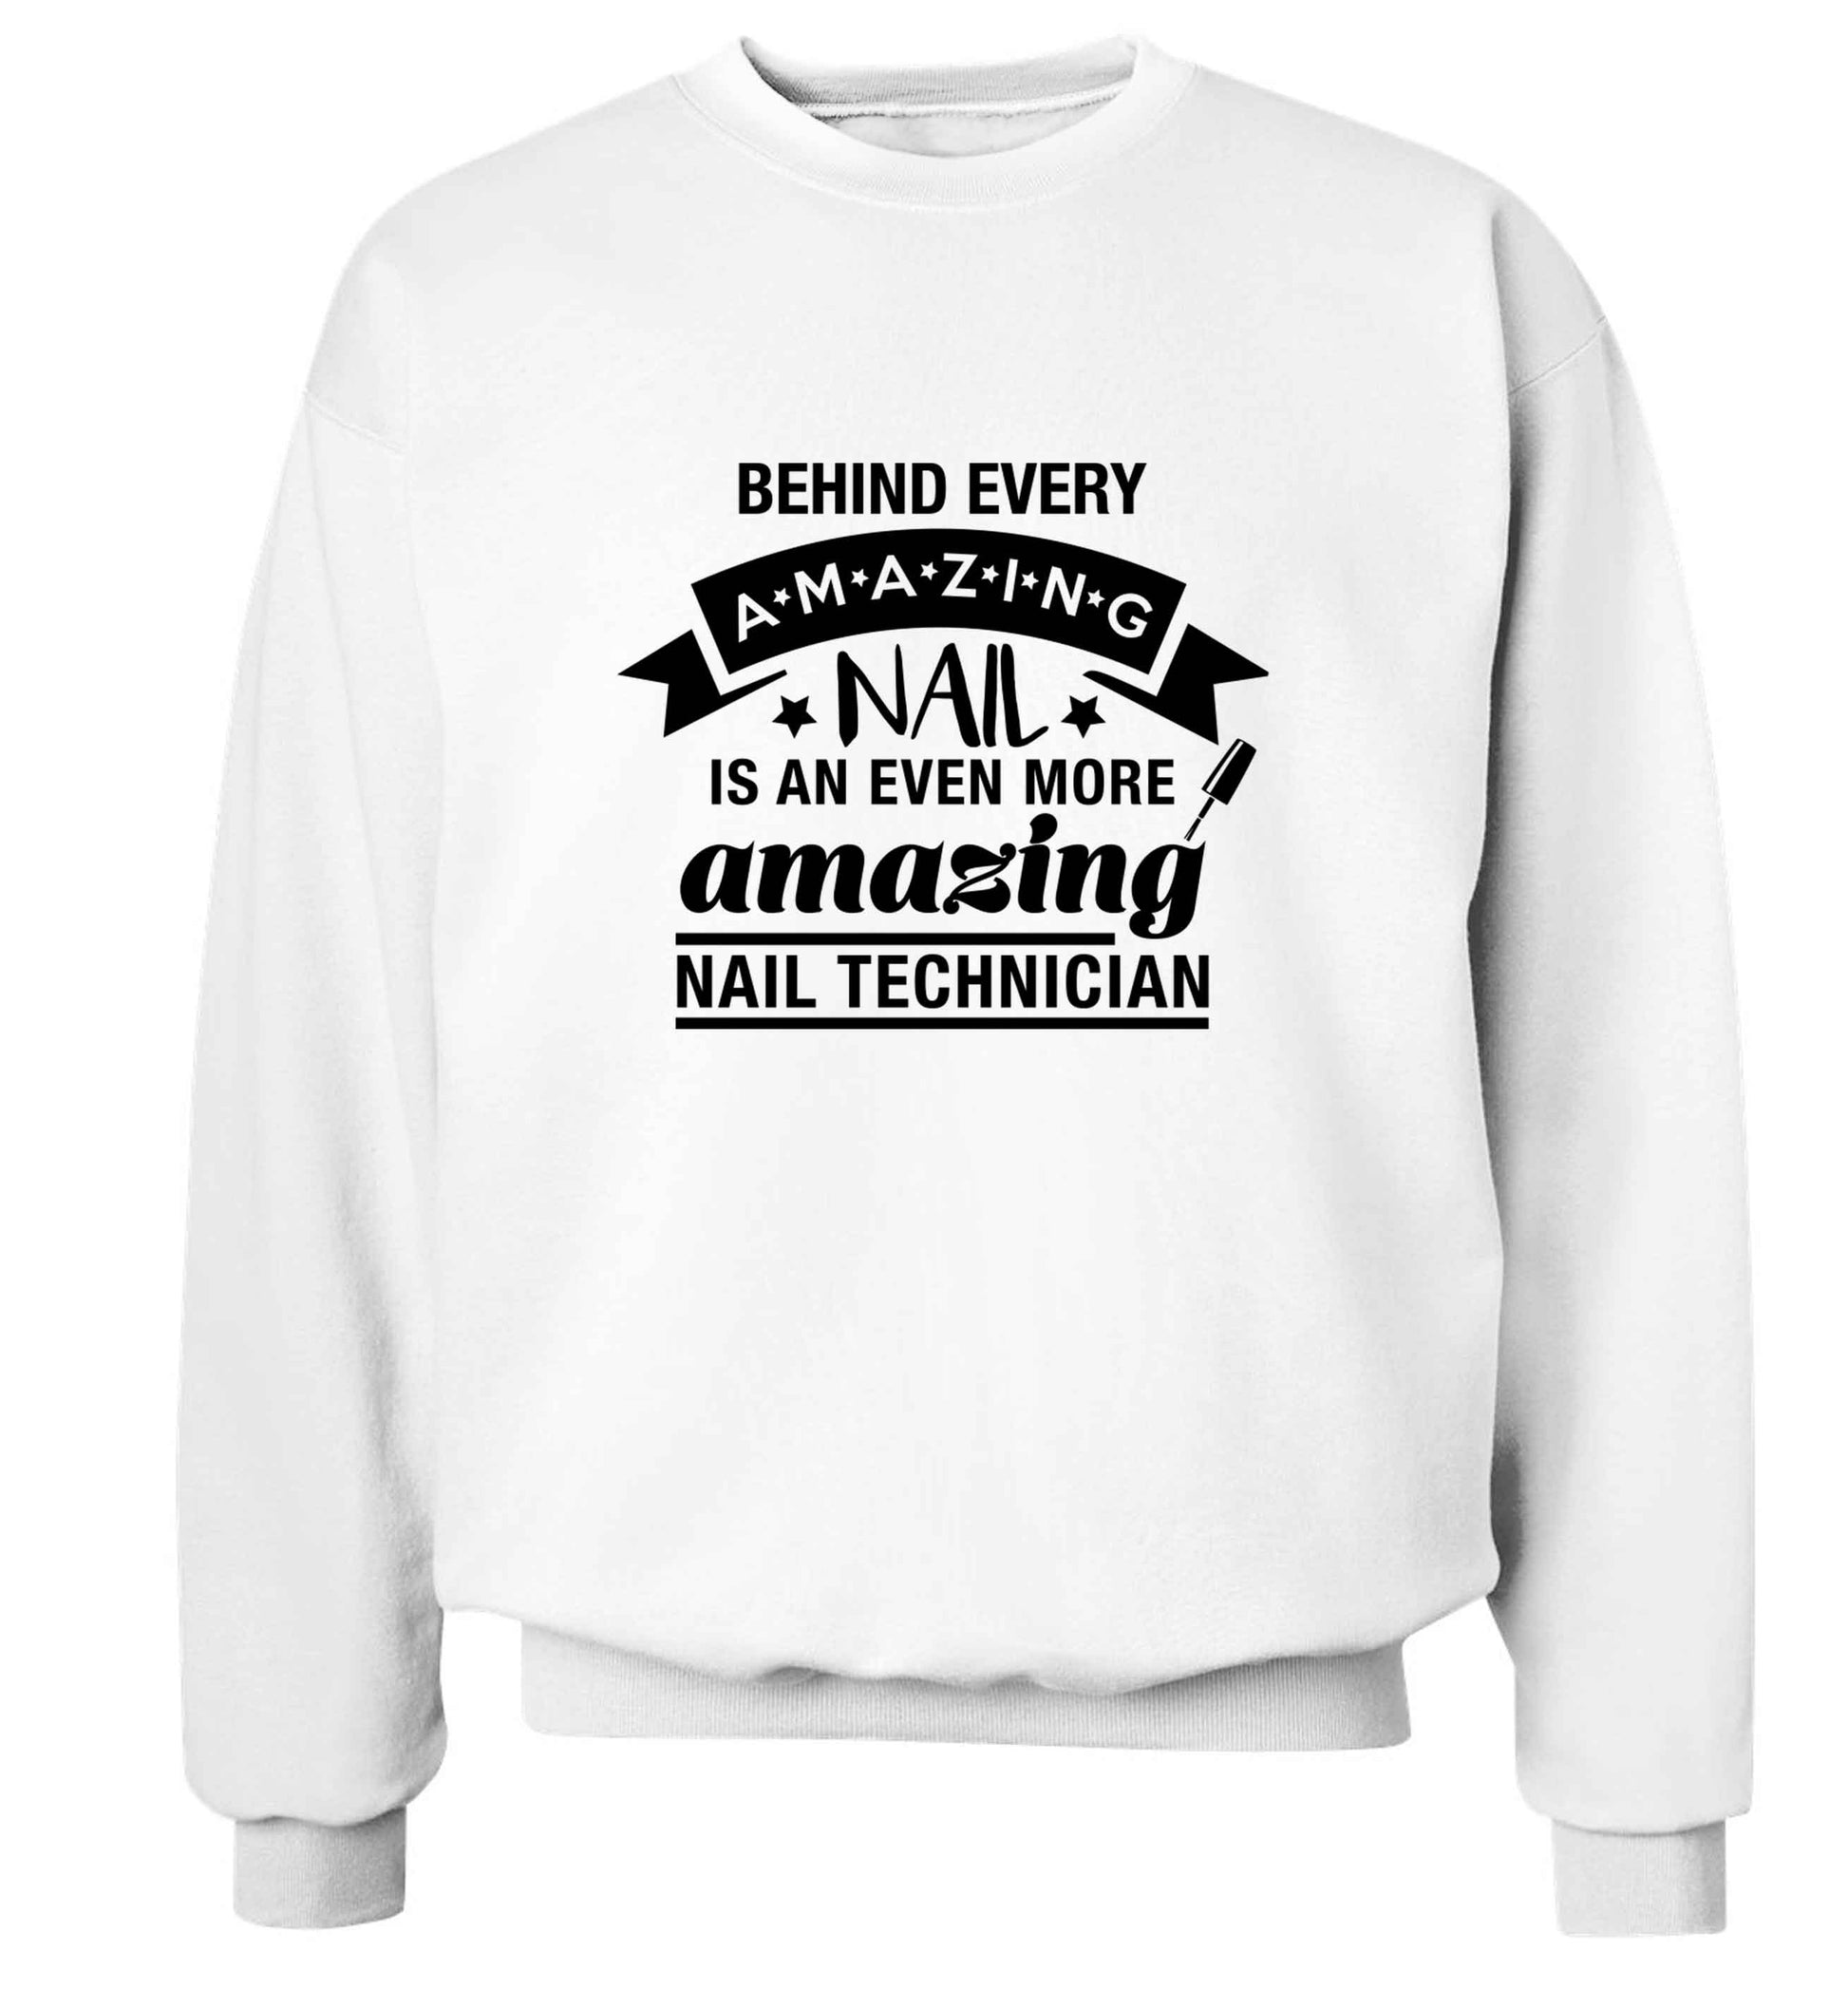 Behind every amazing nail is an even more amazing nail technician adult's unisex white sweater 2XL